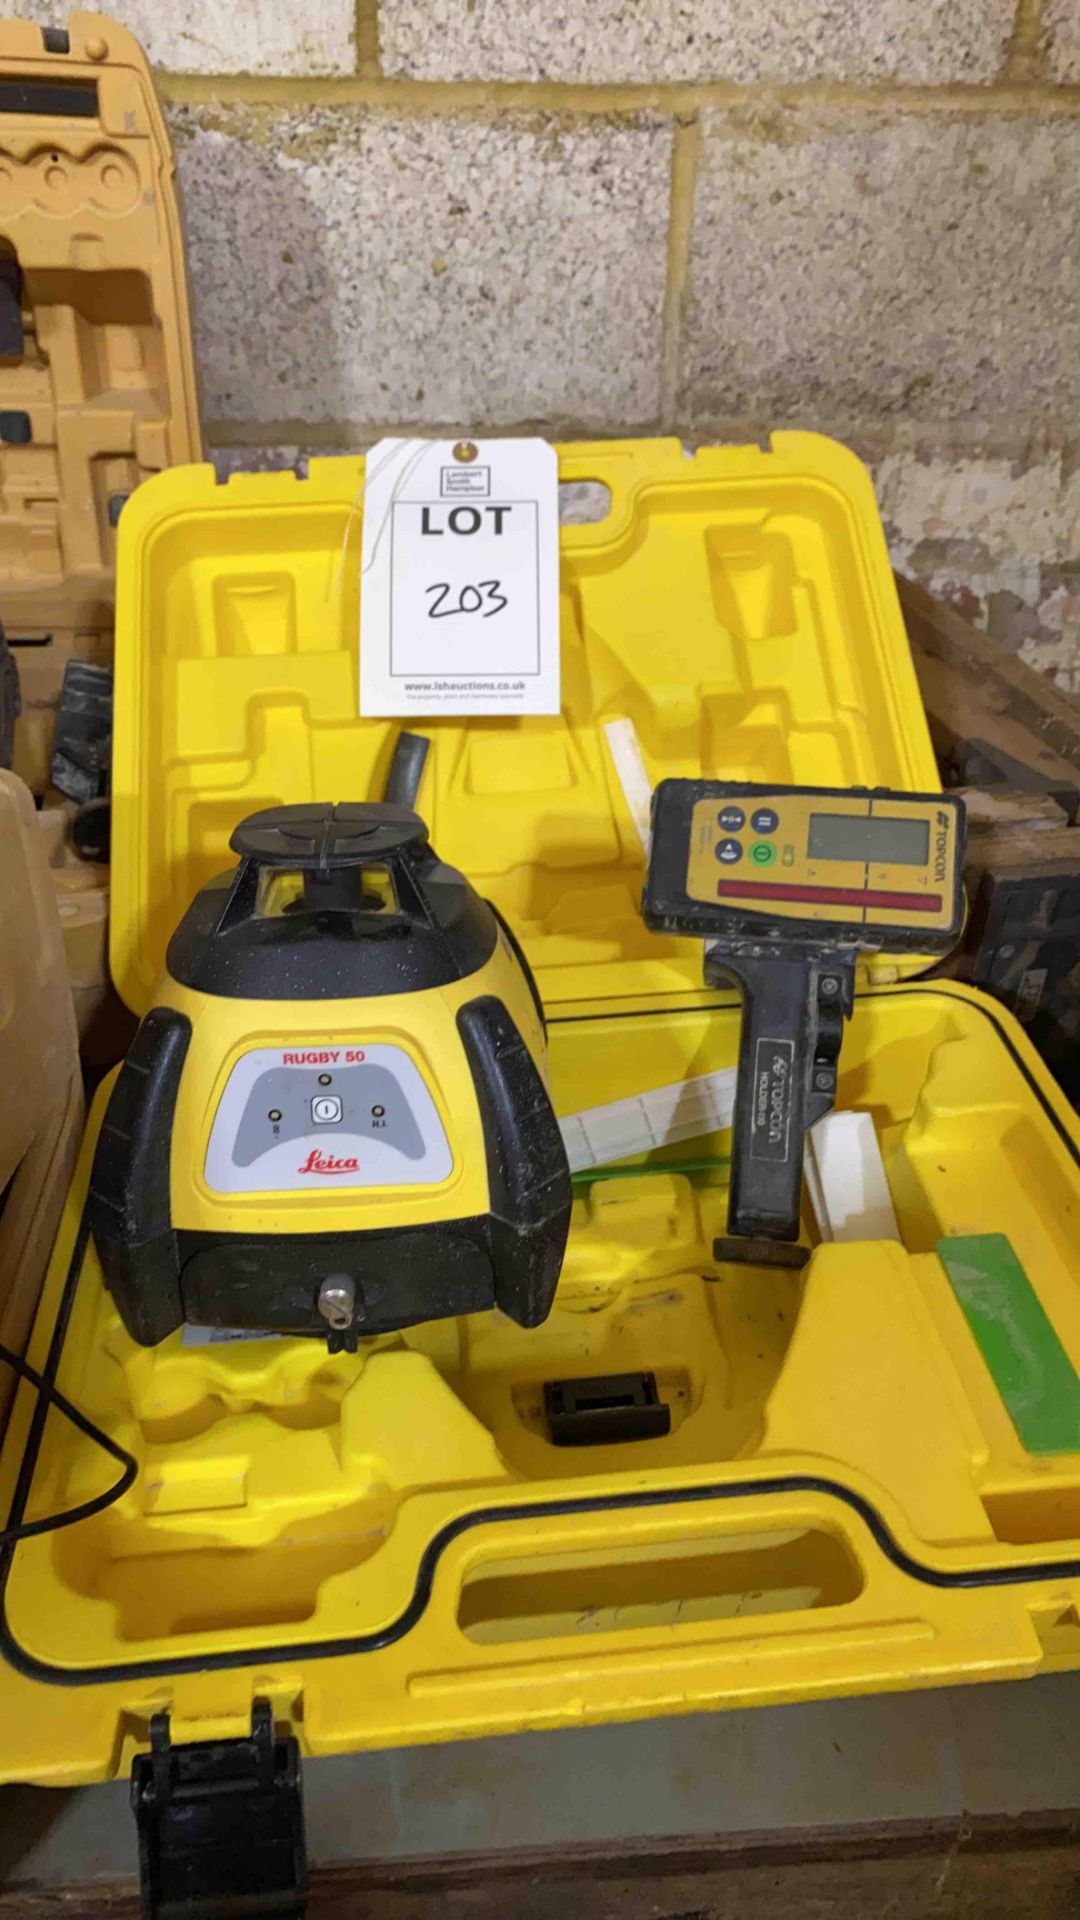 Leica rugby 50 laser level complete with topcon handheld control - Image 3 of 3